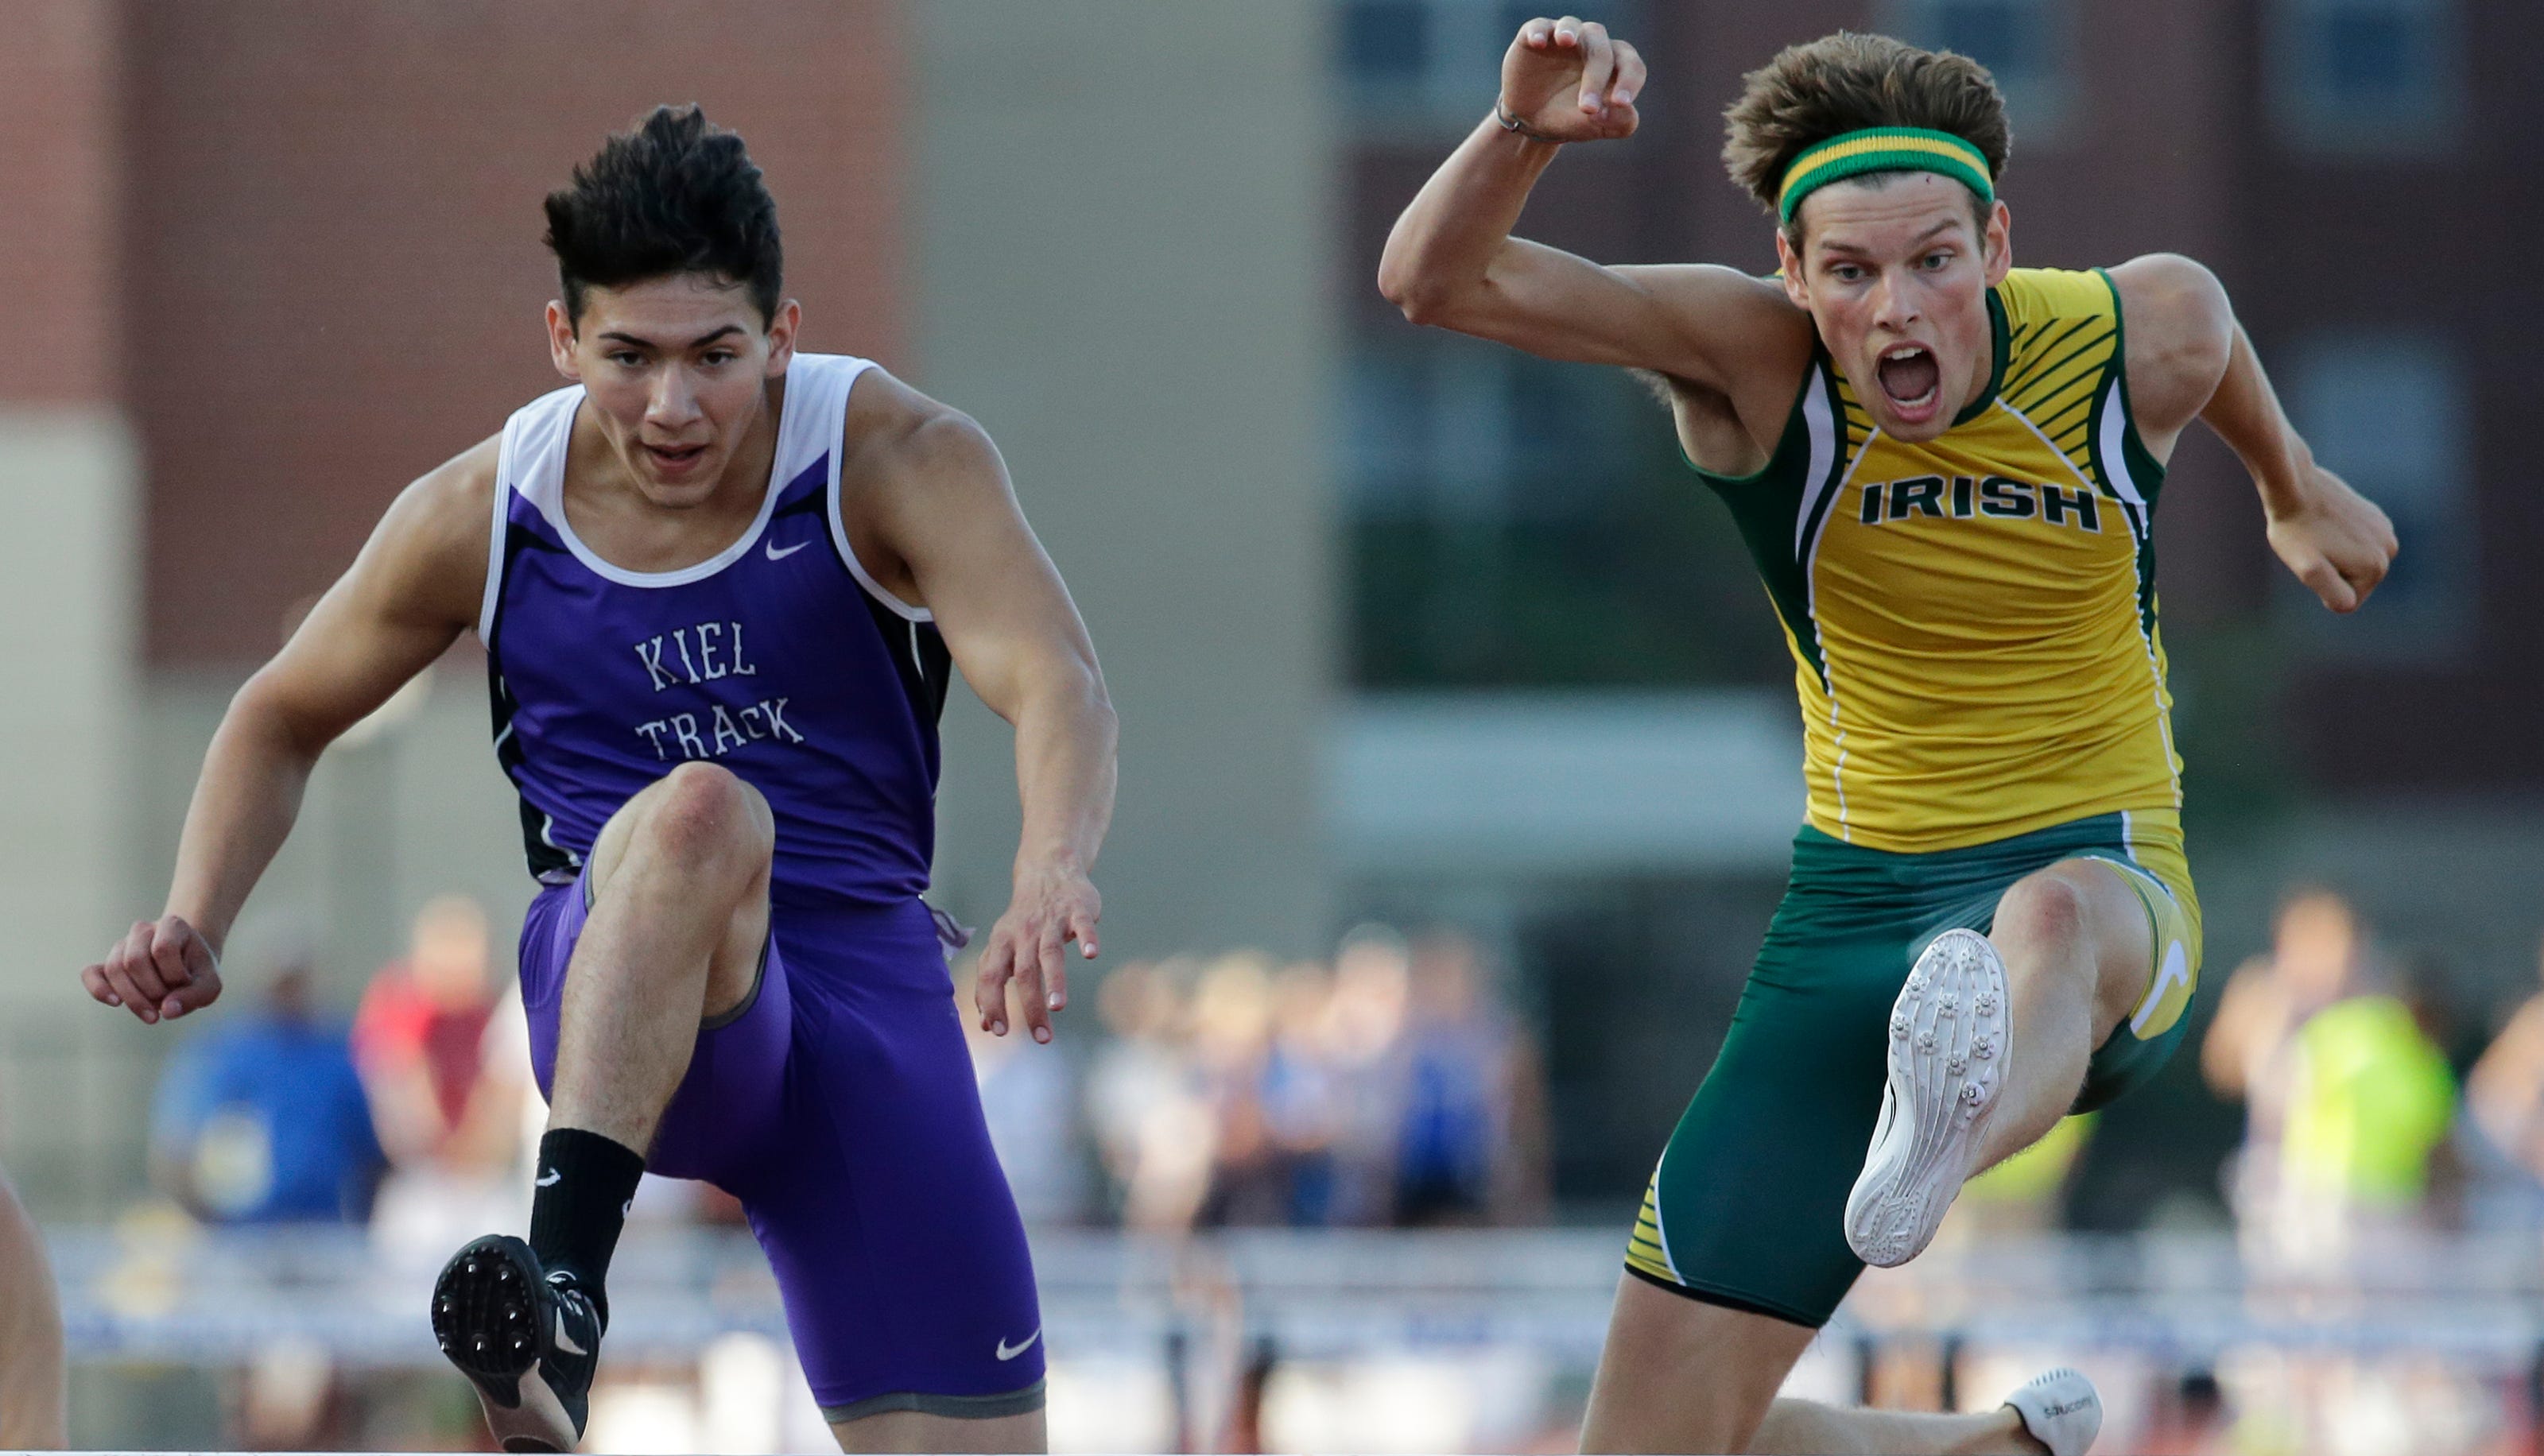 State track and field championships will remain at UWLa Crosse